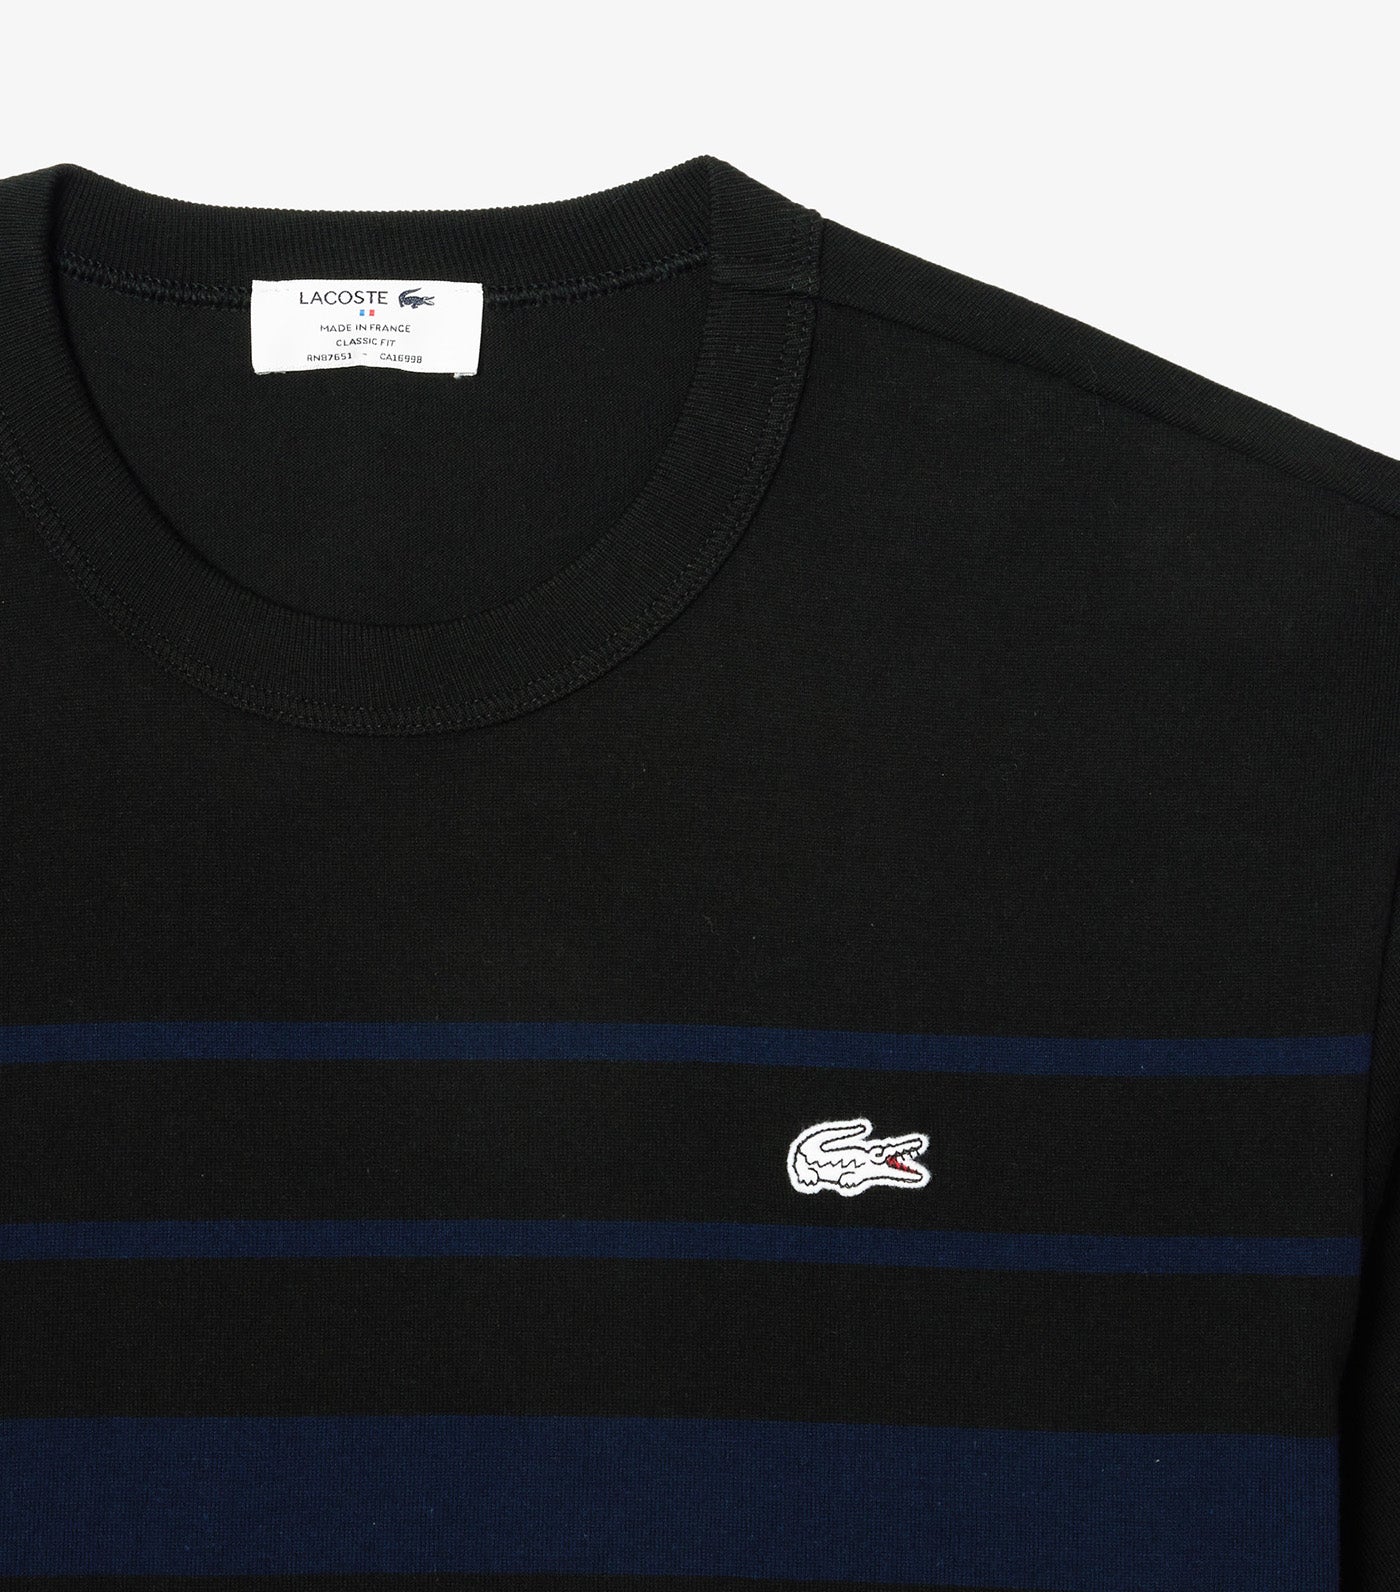 French Made Striped Jersey T-Shirt Navy Blue/Black